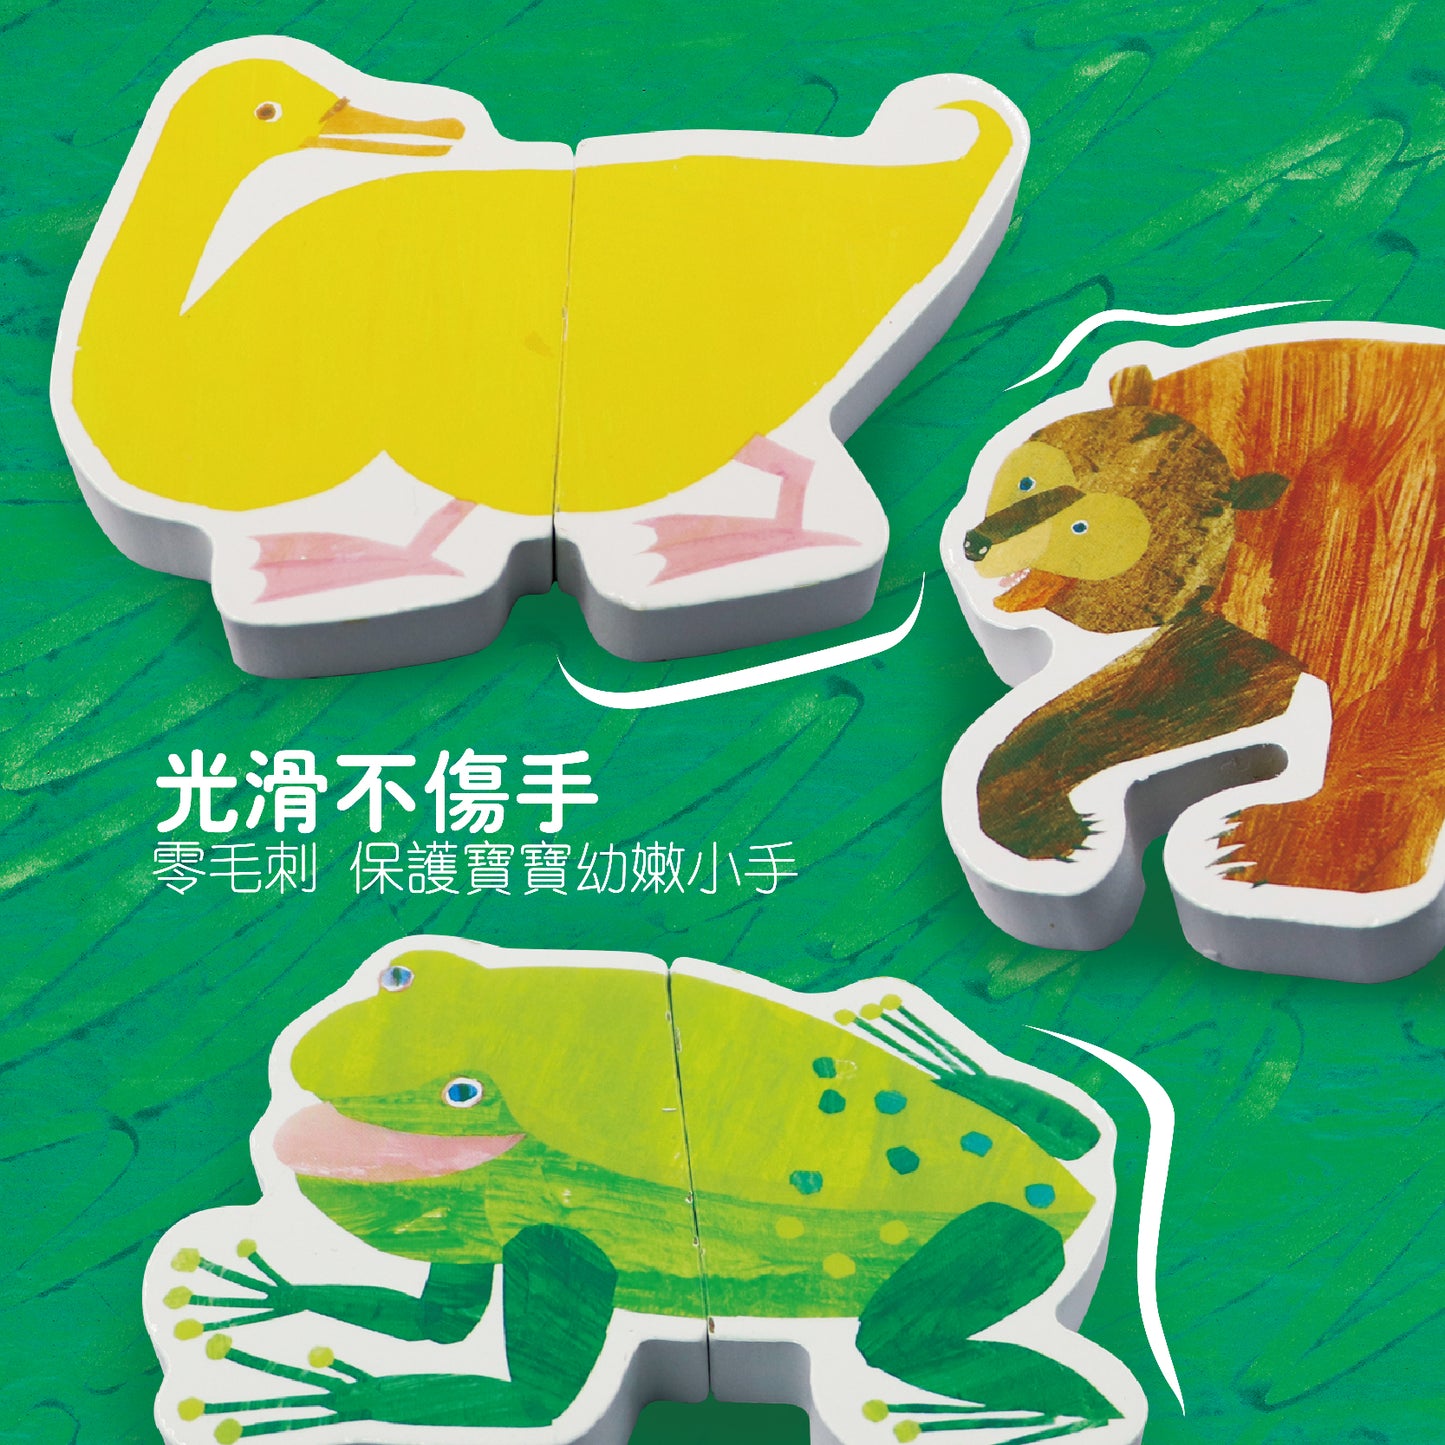 Eric Carle Mix and Match Magnetic Animals 磁性配對動物